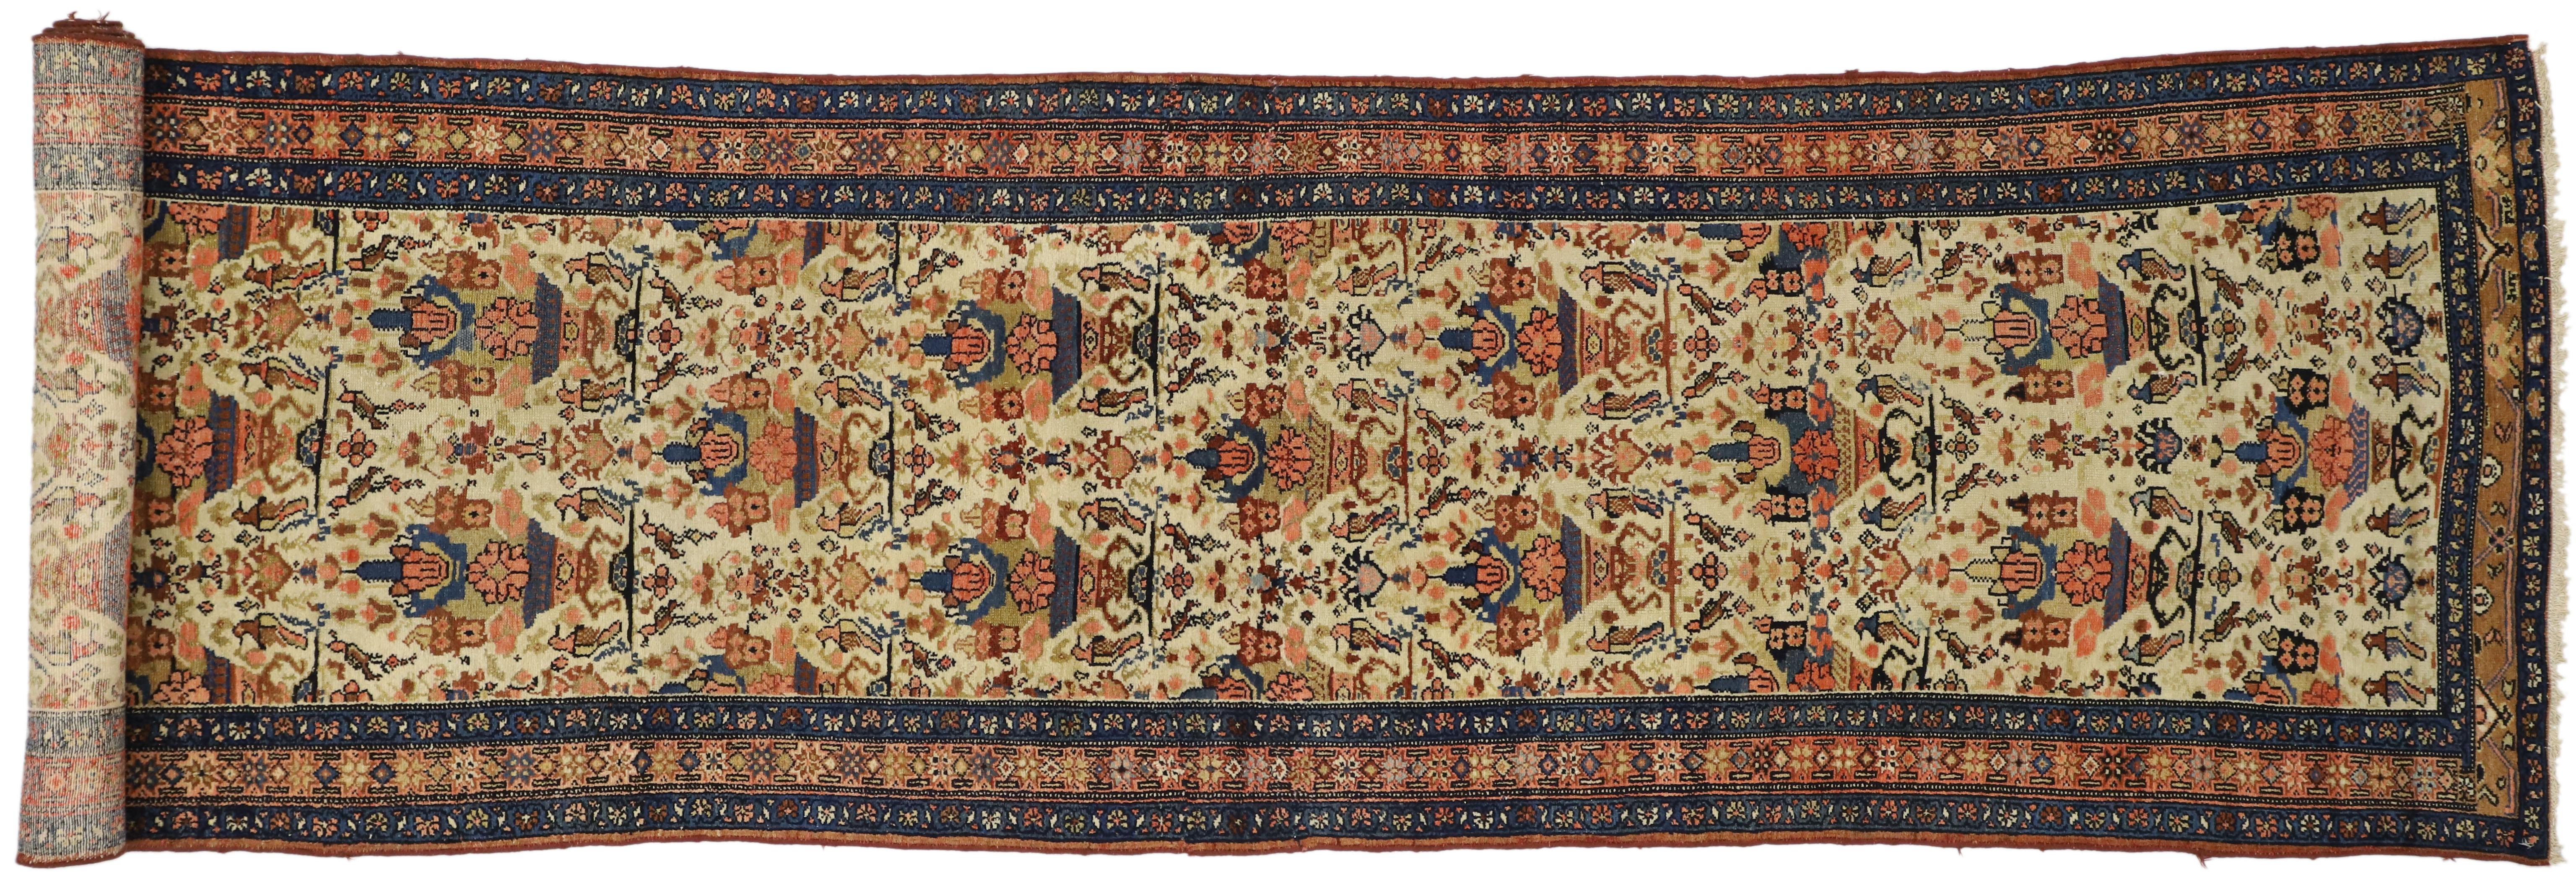 Antique Persian Malayer Runner with Romantic Victorian Style 3